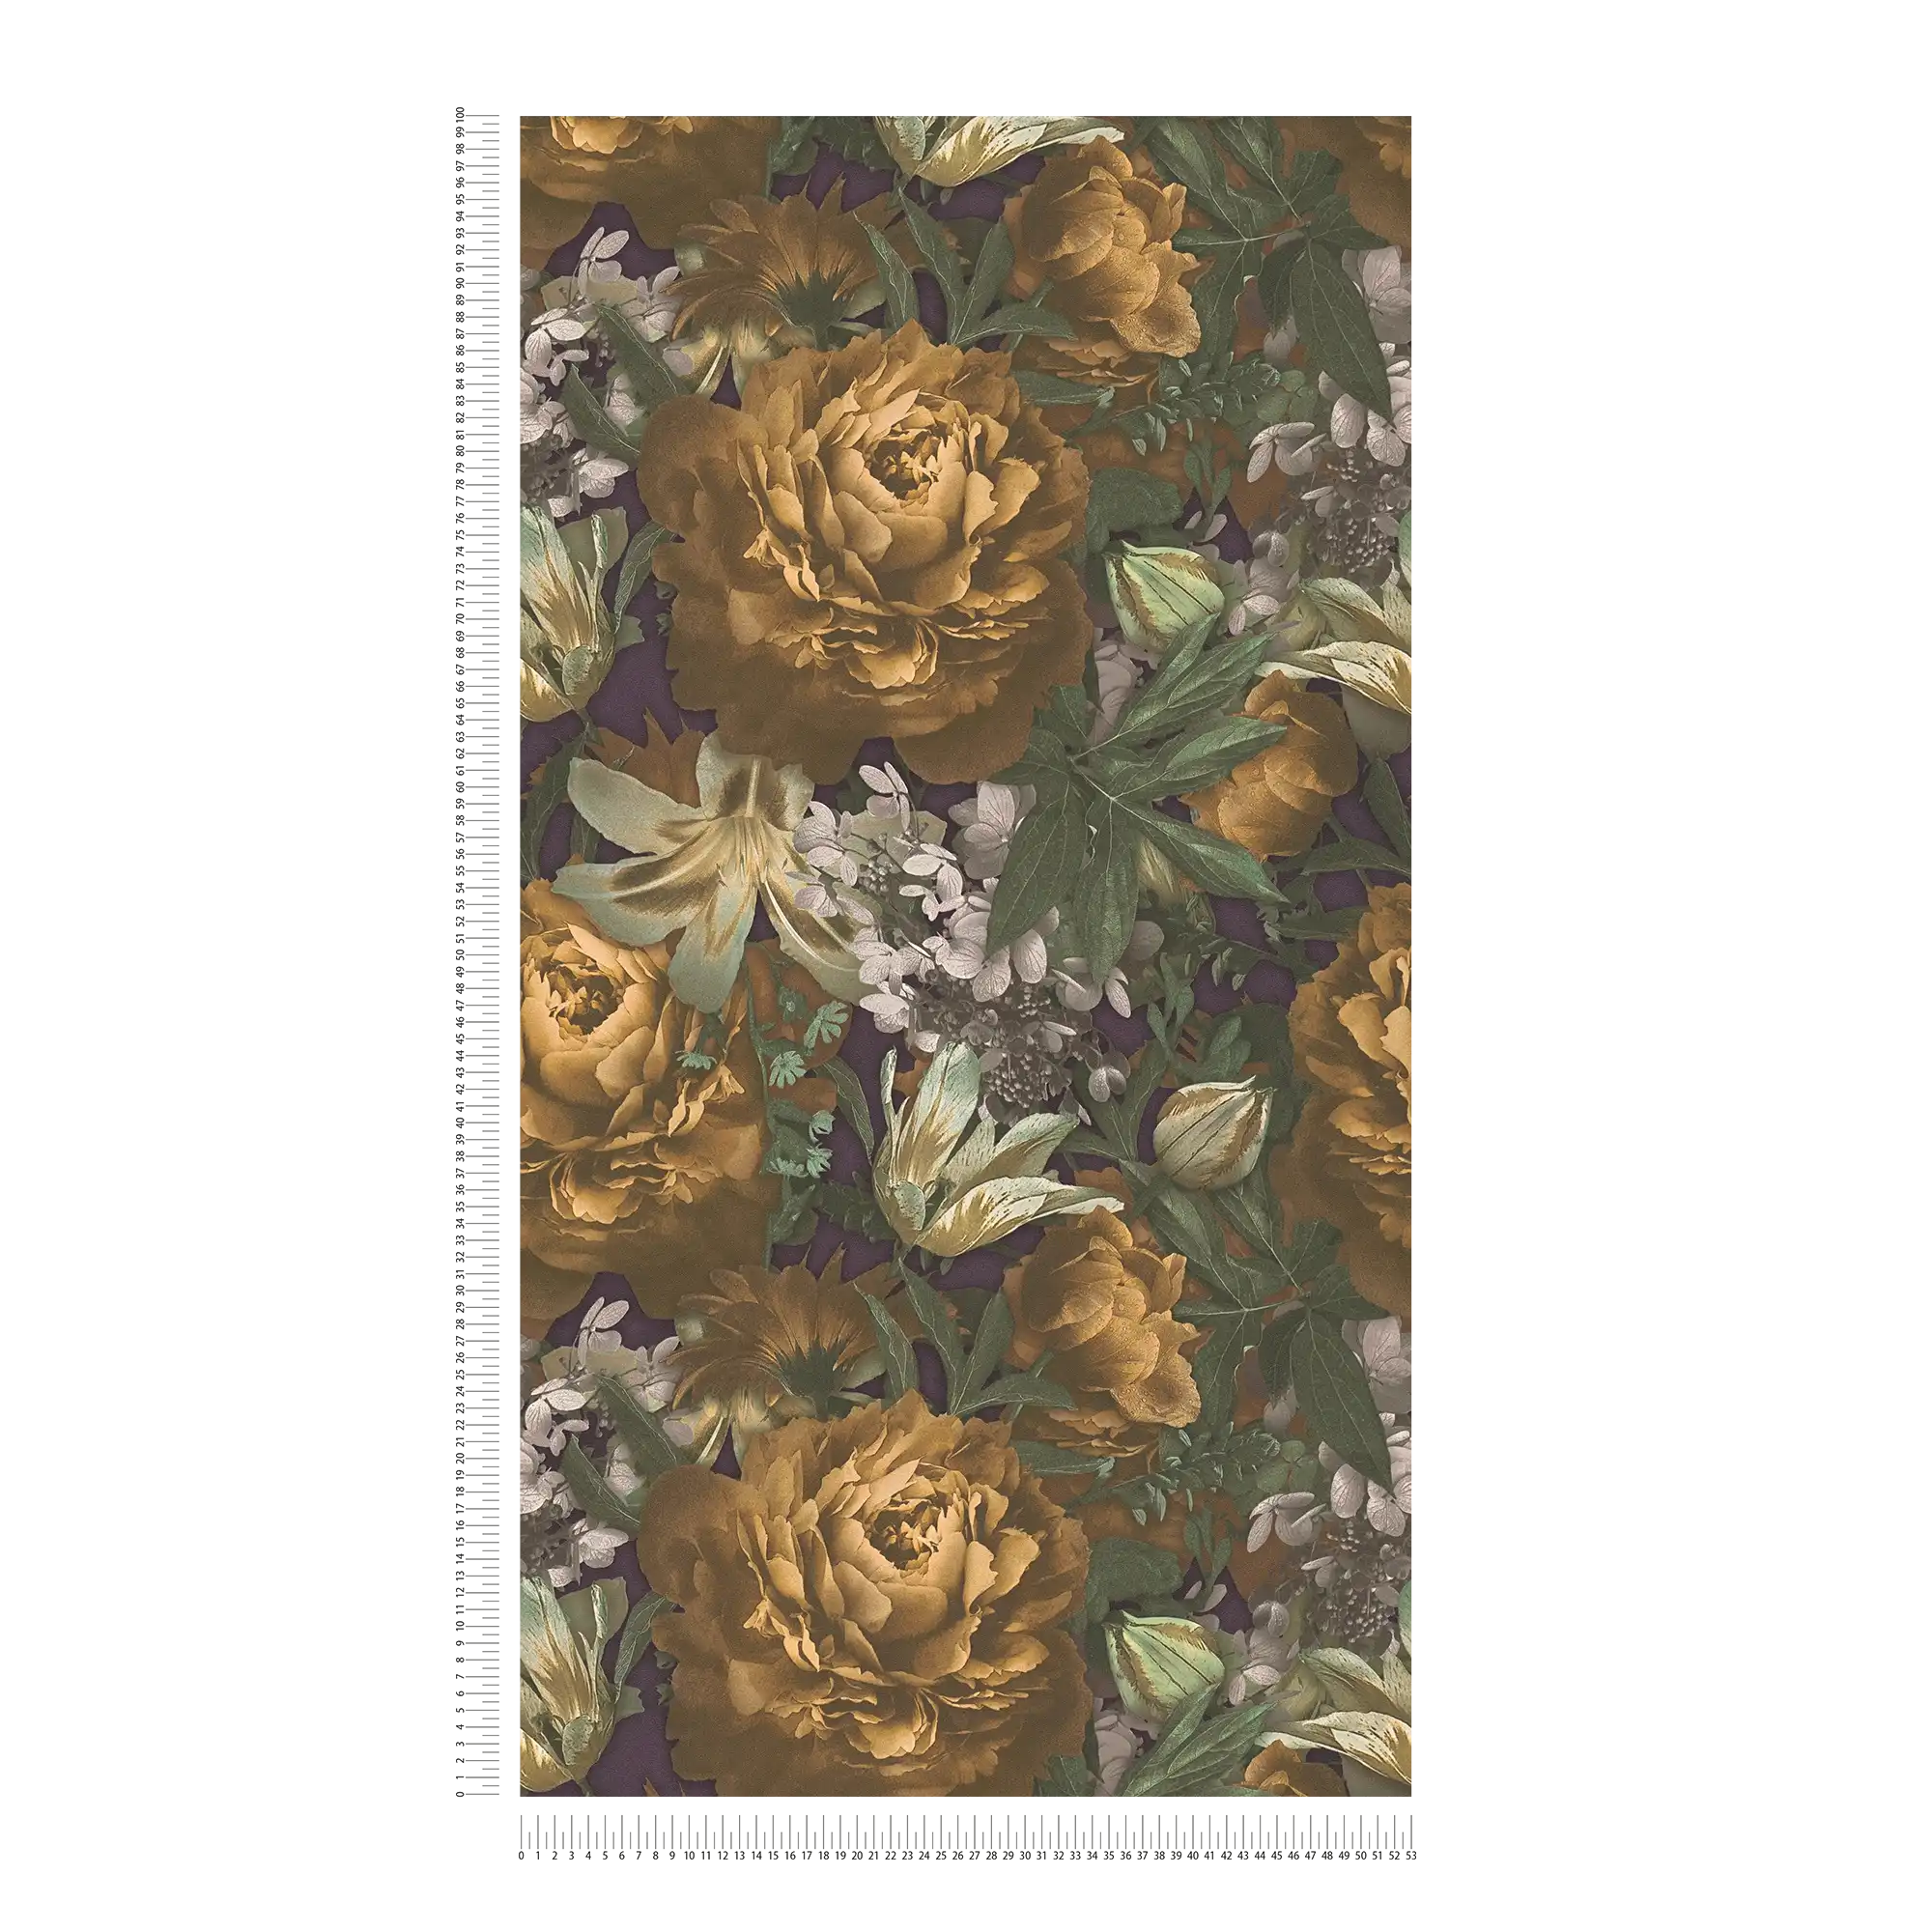             Flowers wallpaper roses & tulips - yellow, brown, green
        